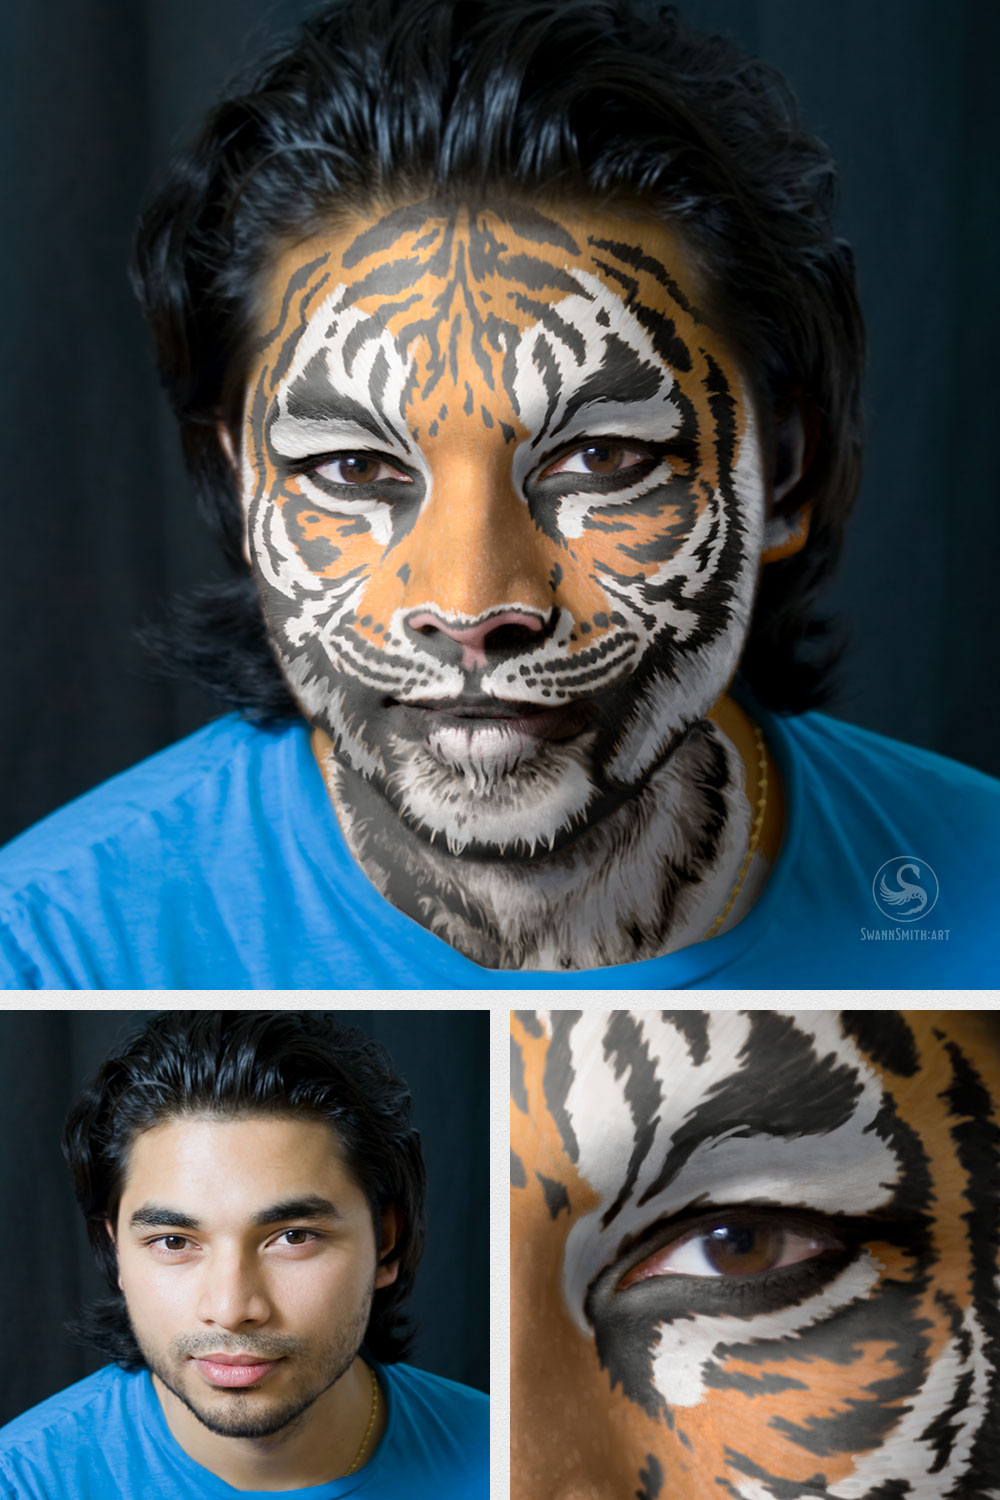 After and before digital face painting of a tiger